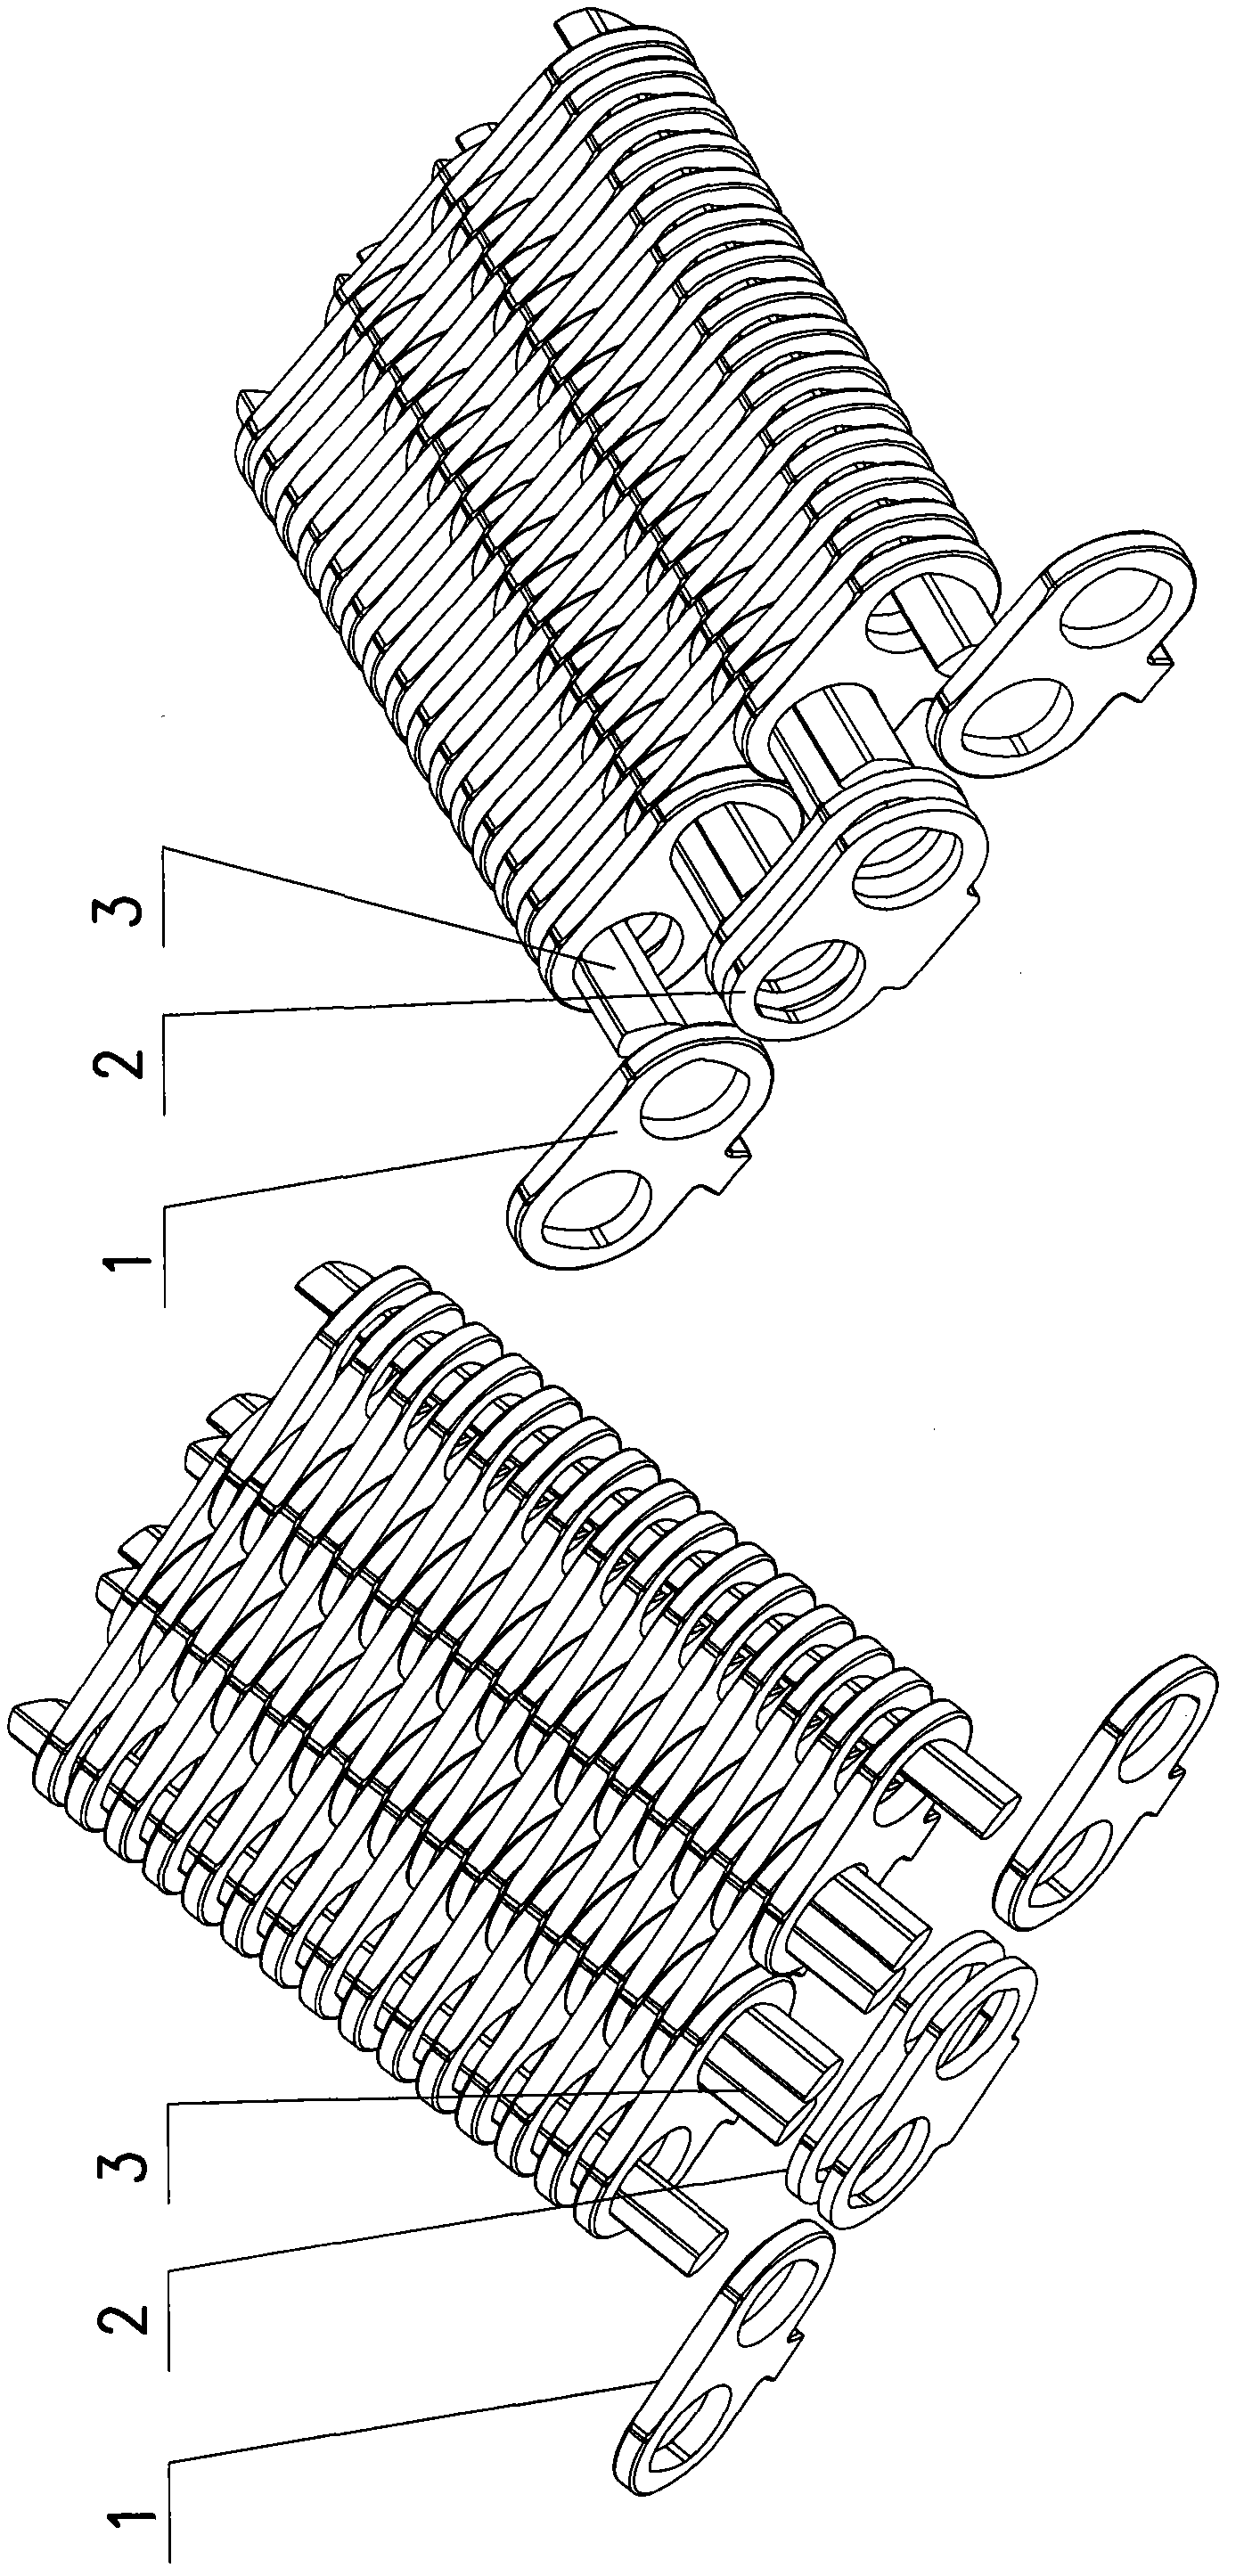 Method for designing chain without welding spot and riveting spot